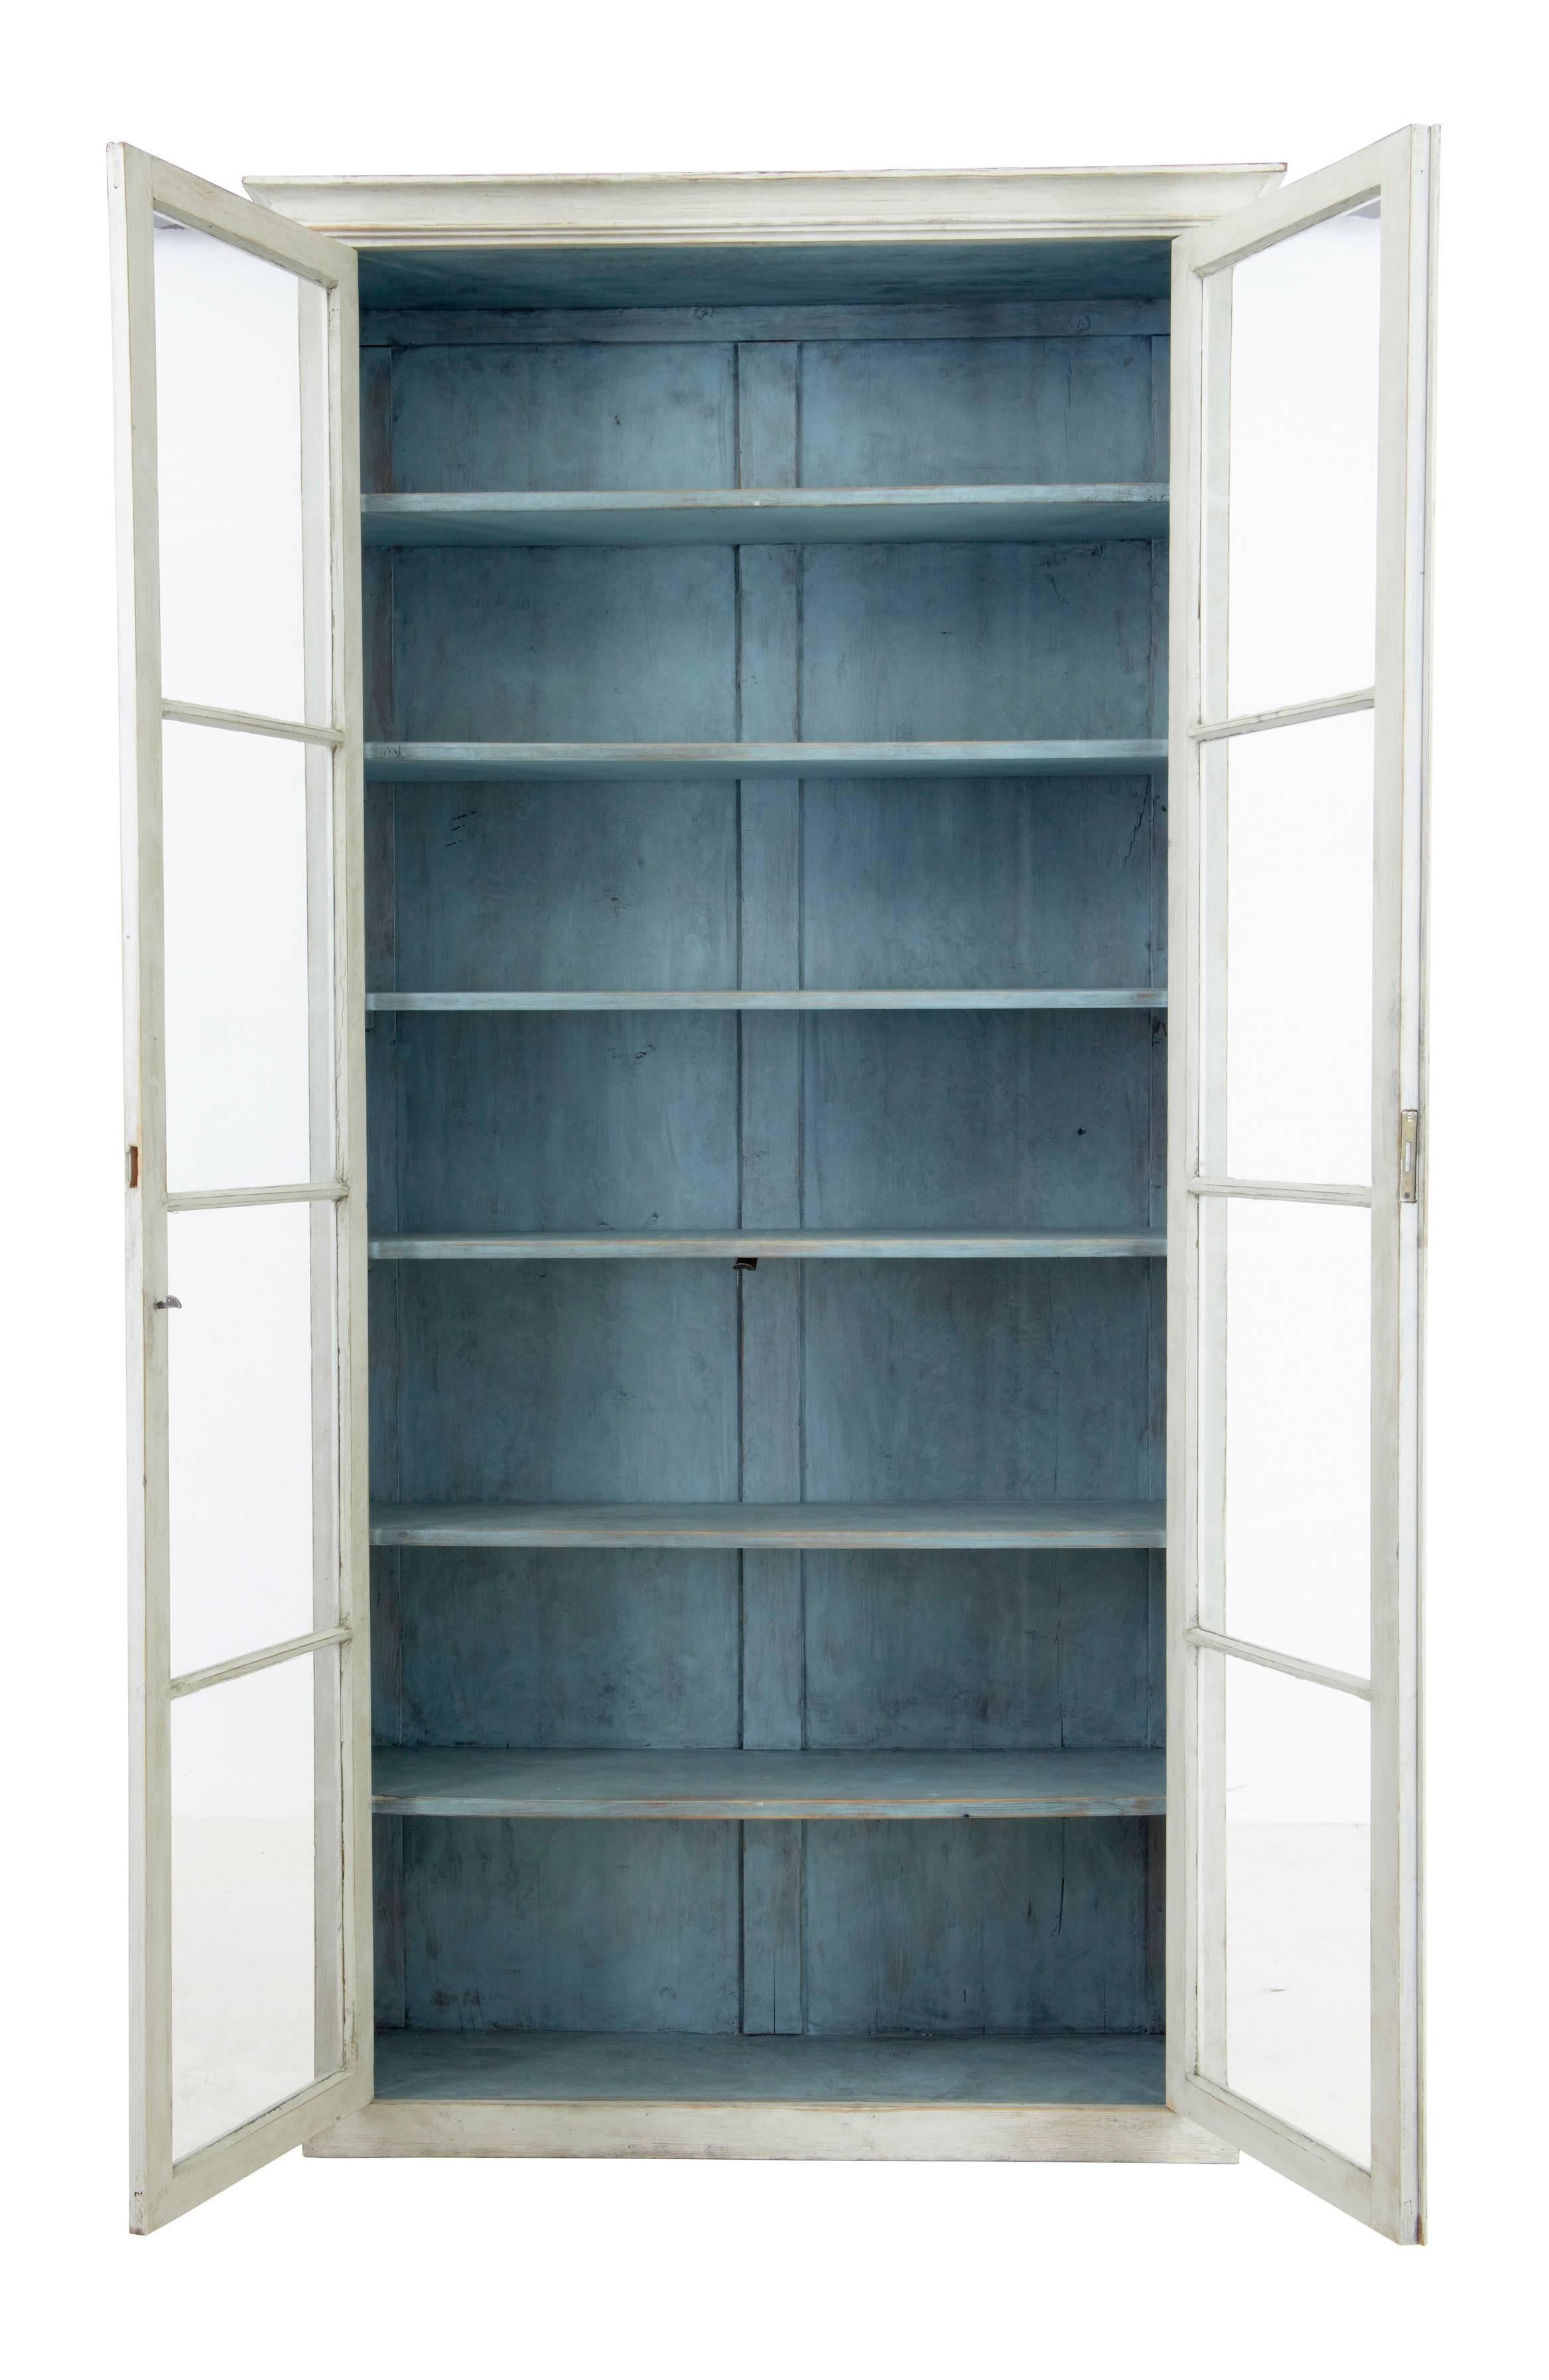 Excellent quality large painted vitrine cabinet, circa 1890.
Pine with later paint which is weathered with slight contrasting faded blue interior.
Original glazed doors.
Six interior shelves.

Measures: Height: 83 1/4